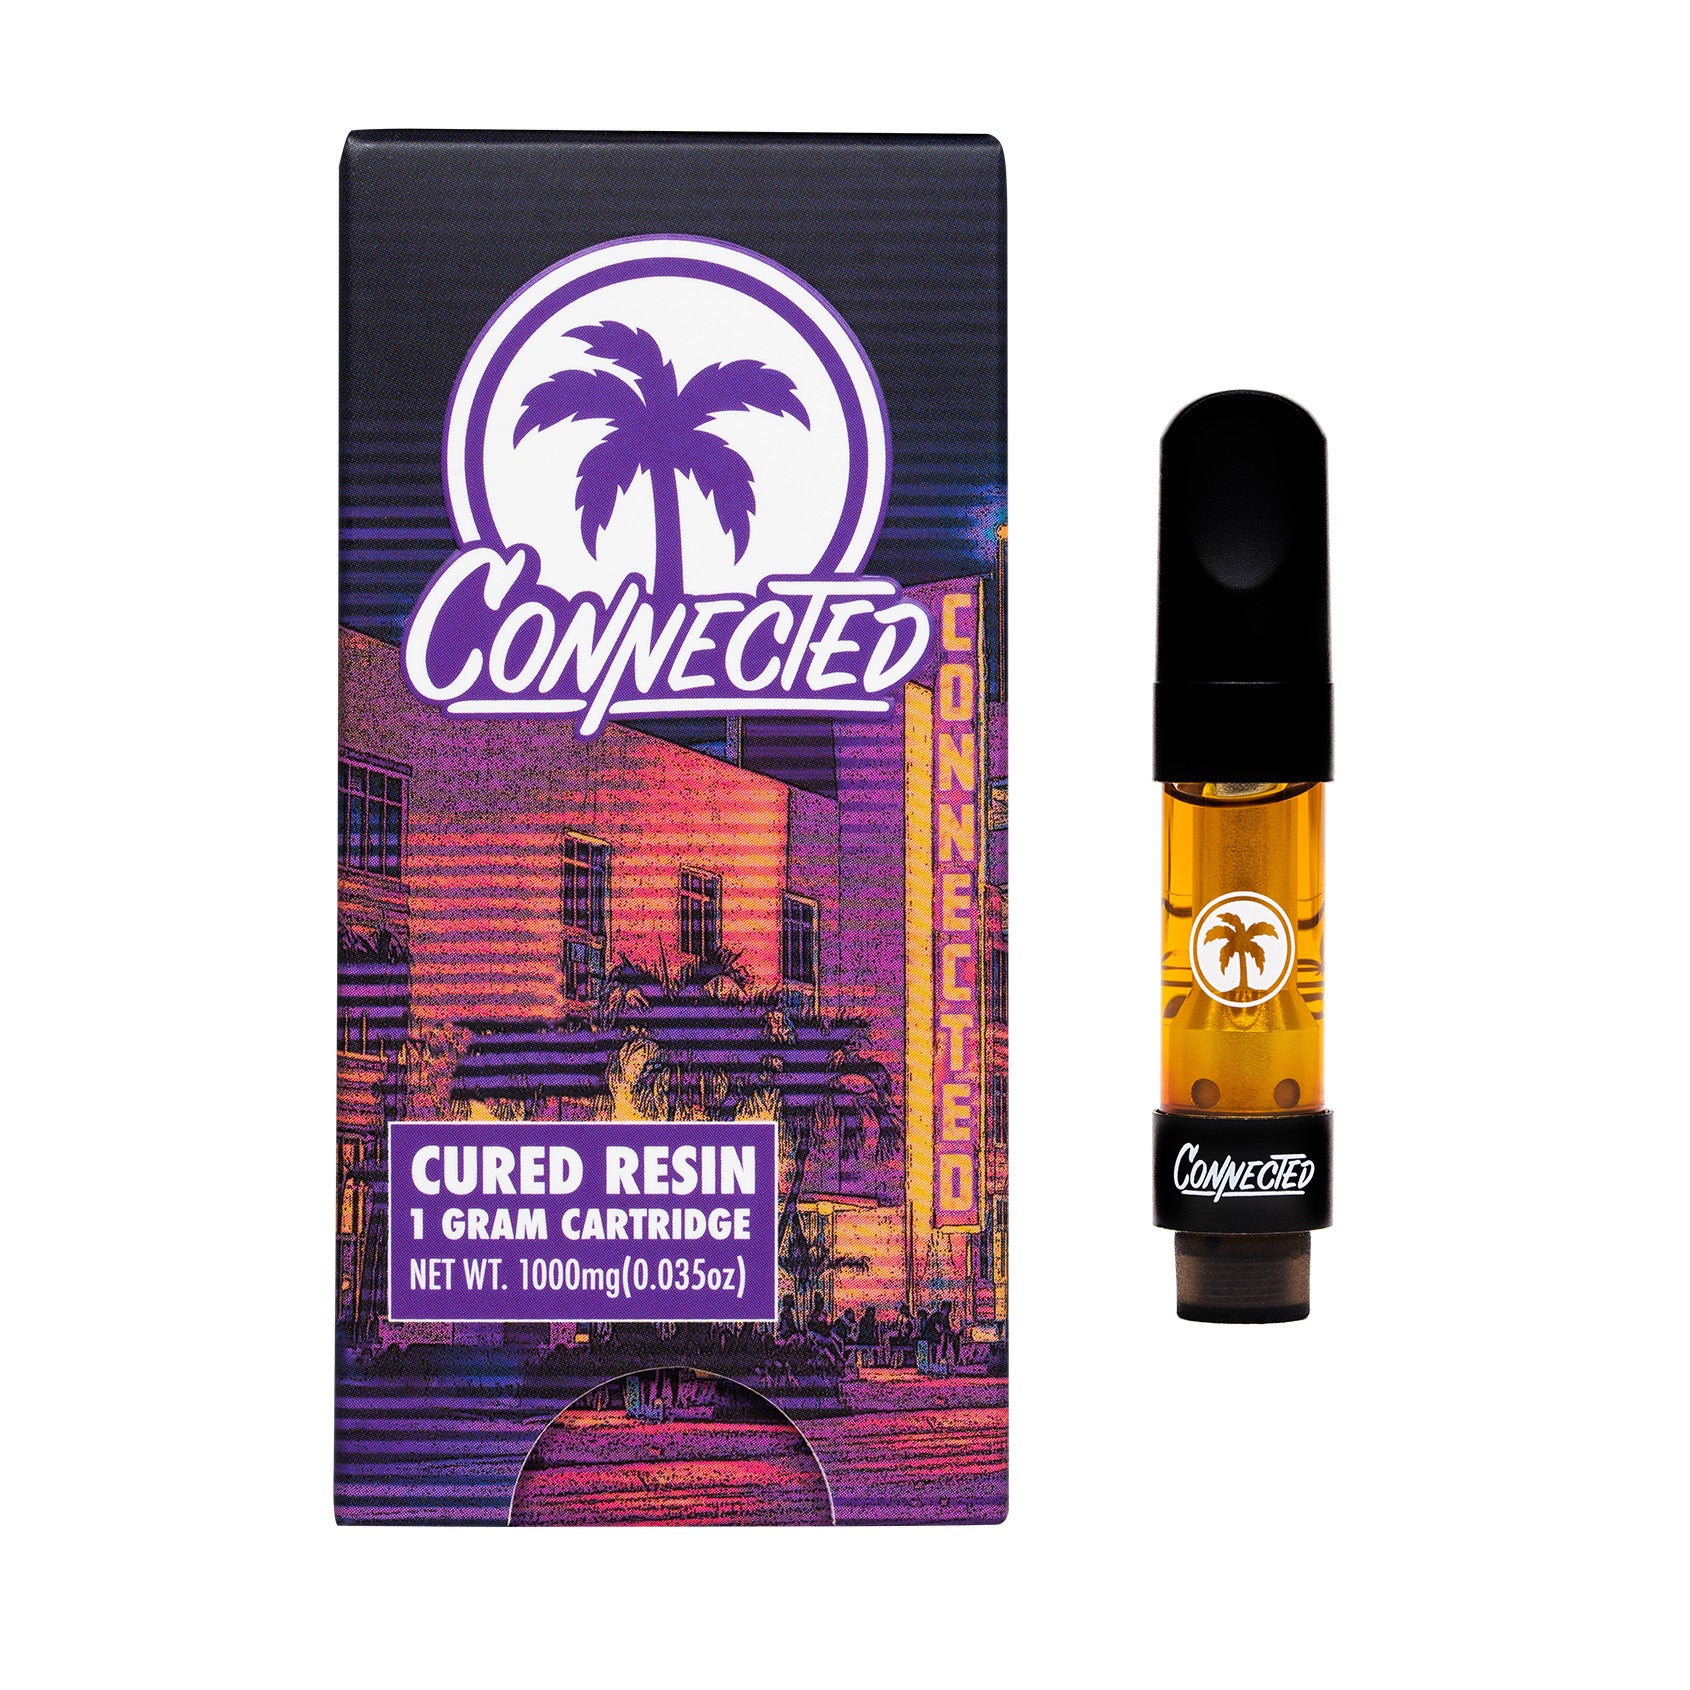 HitchHiker Cured Resin Cartridge (1G)